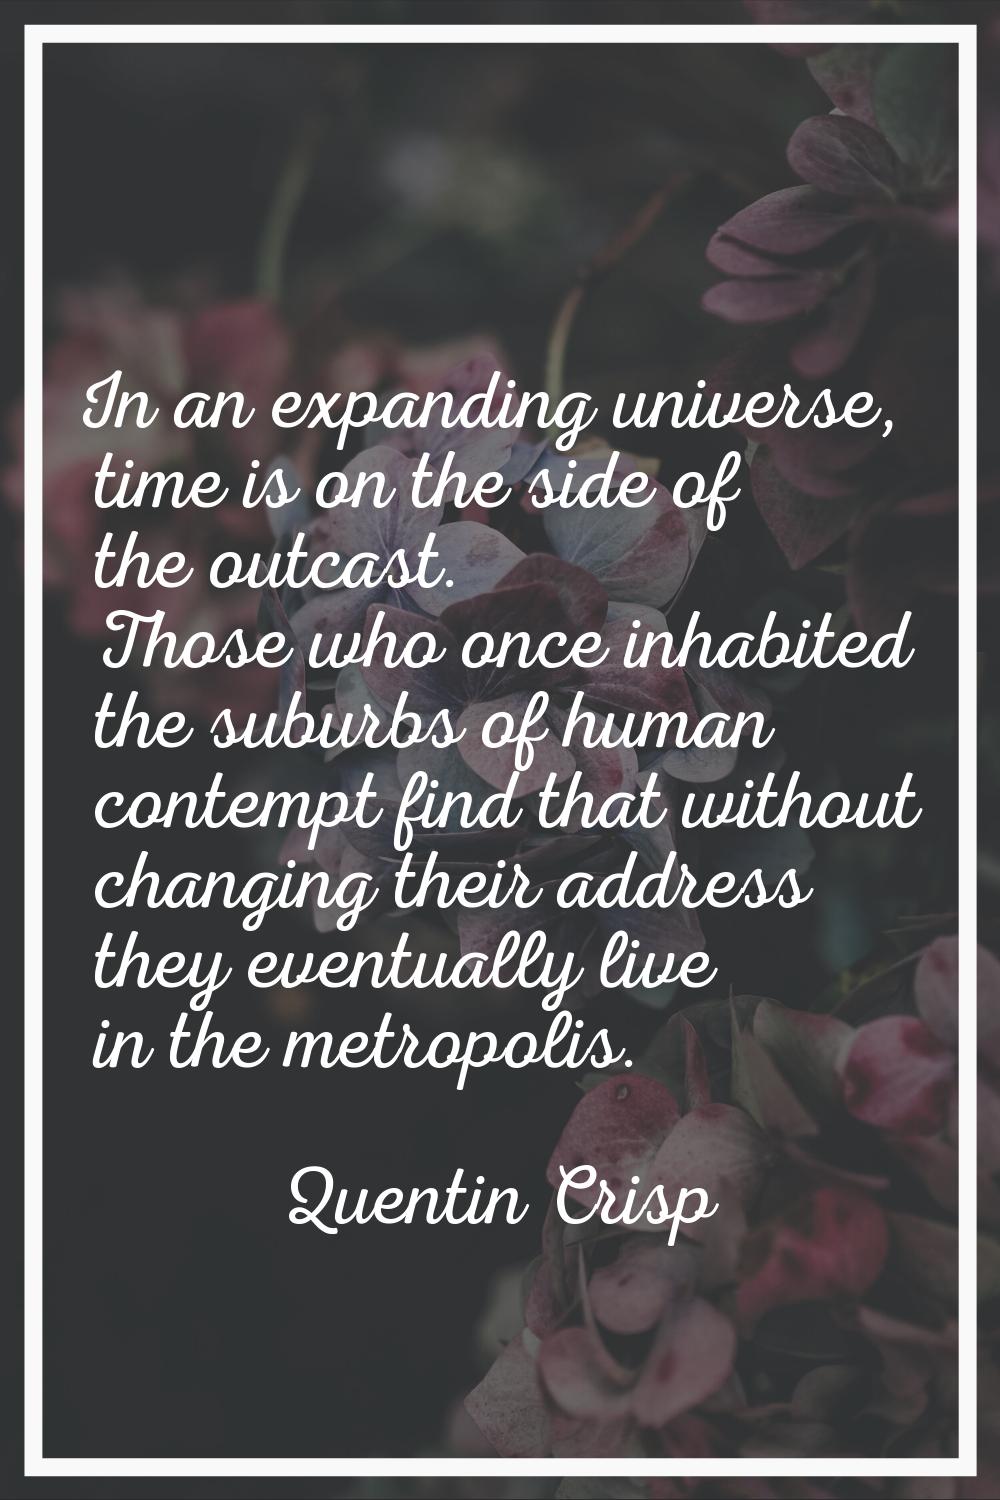 In an expanding universe, time is on the side of the outcast. Those who once inhabited the suburbs 